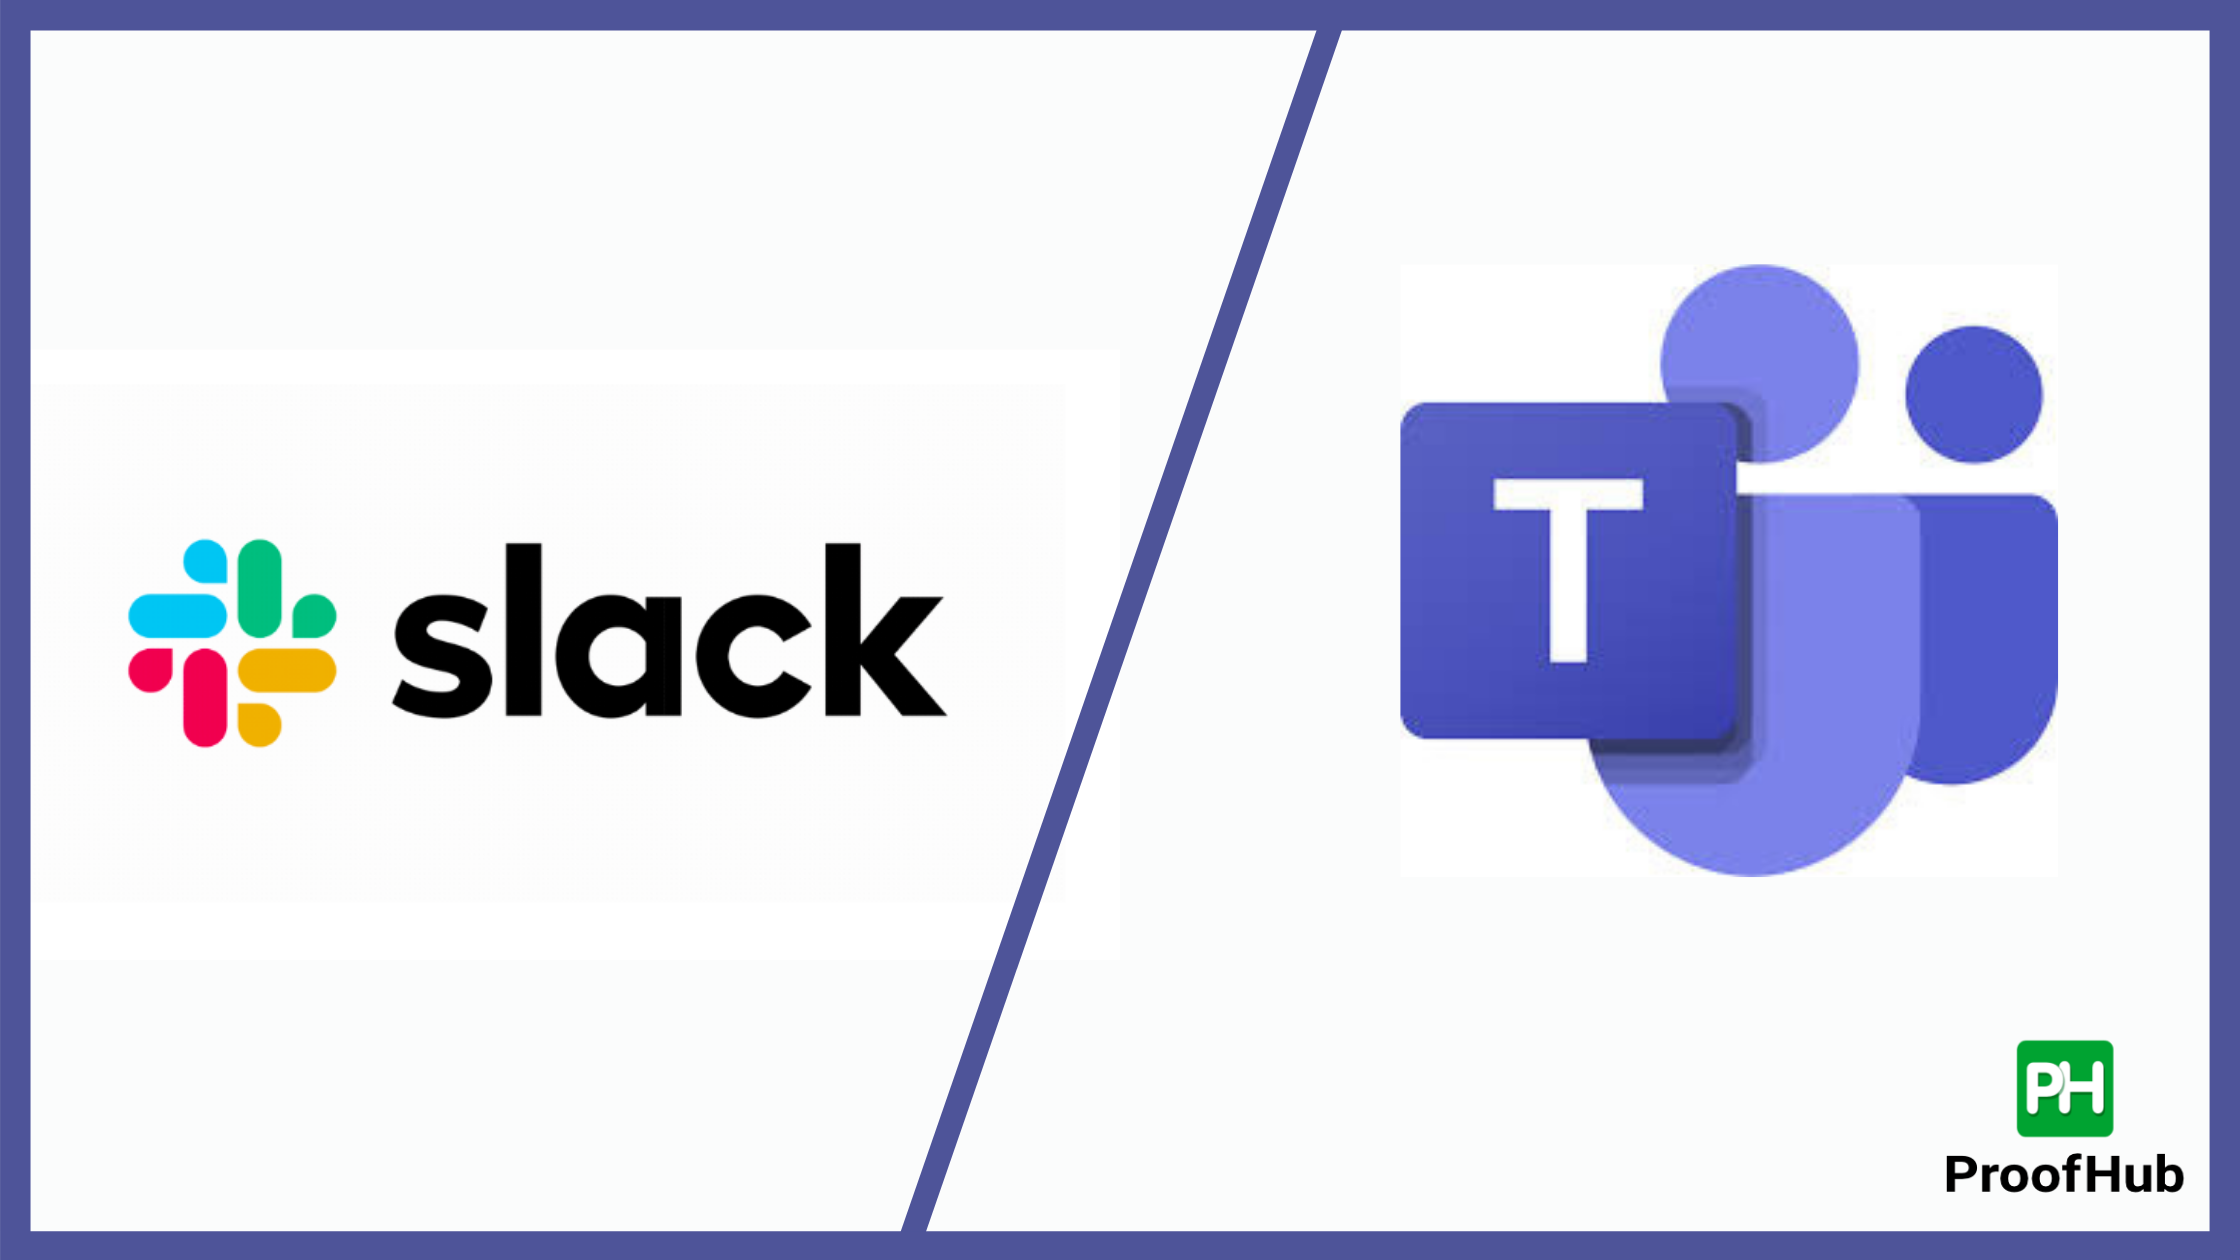 Slack vs Microsoft Teams vs ProofHub – A Quest to Find the Best